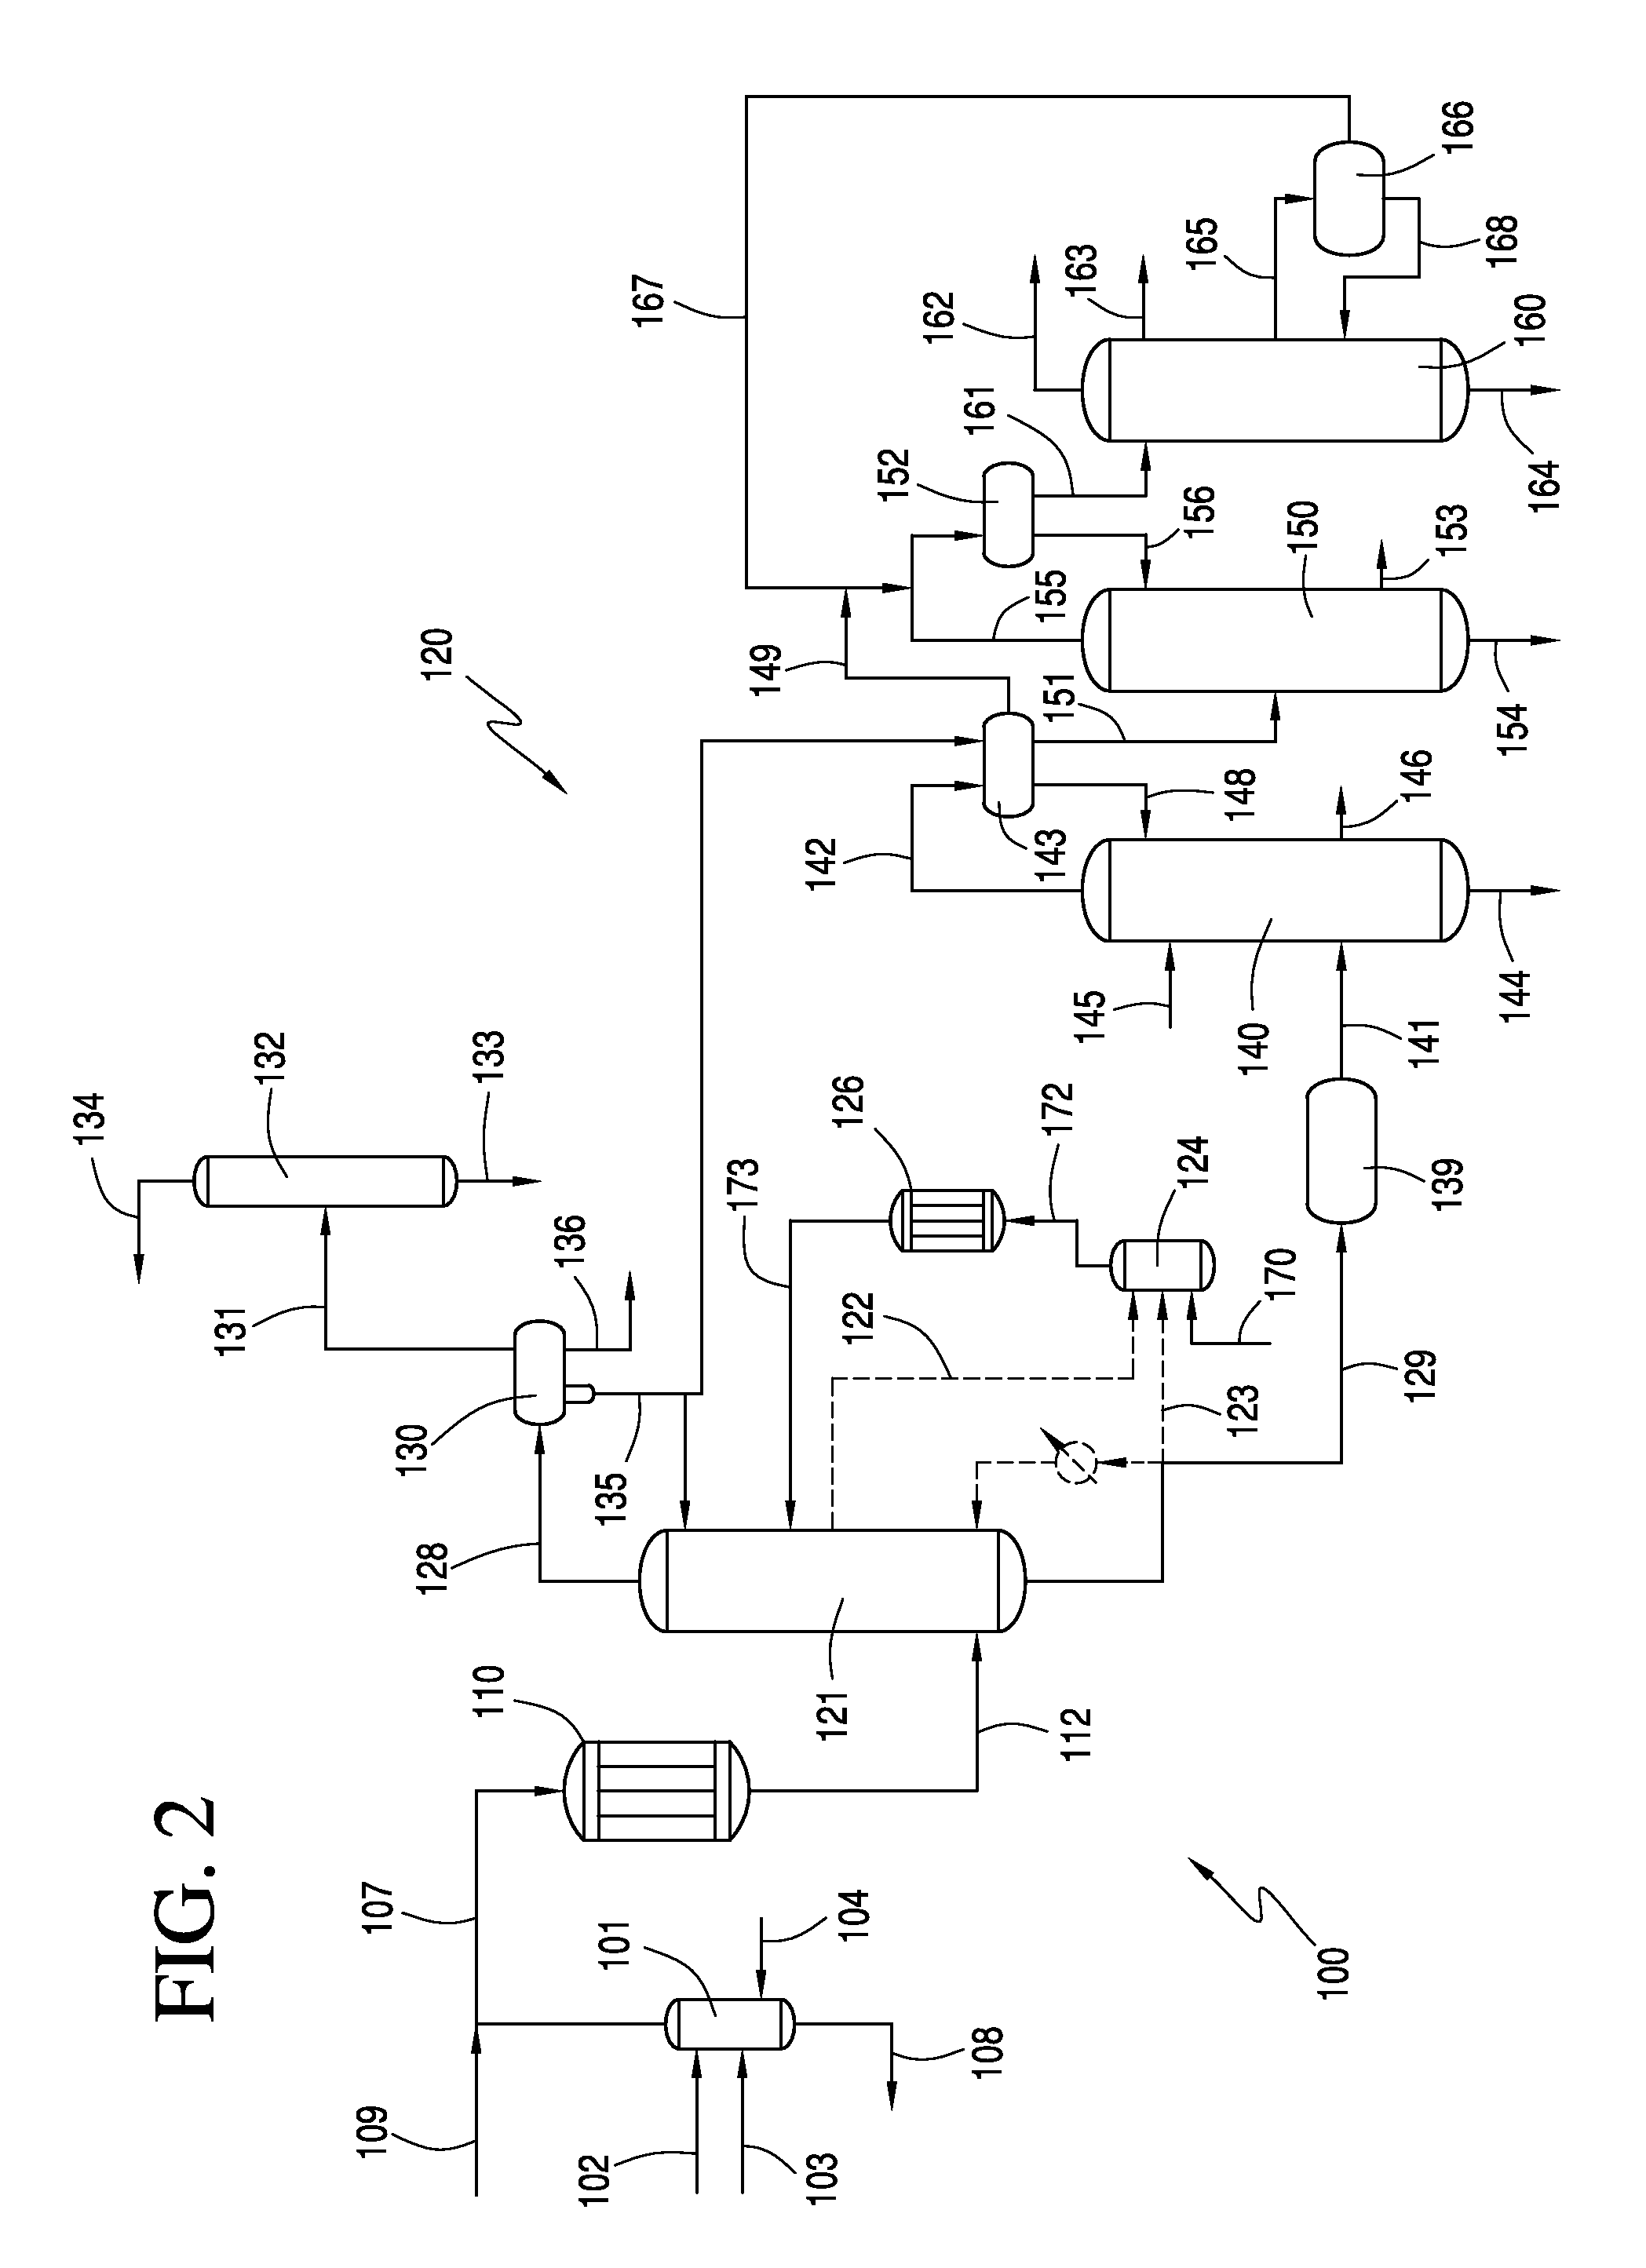 Process for vinyl acetate production having sidecar reactor for predehydrating column